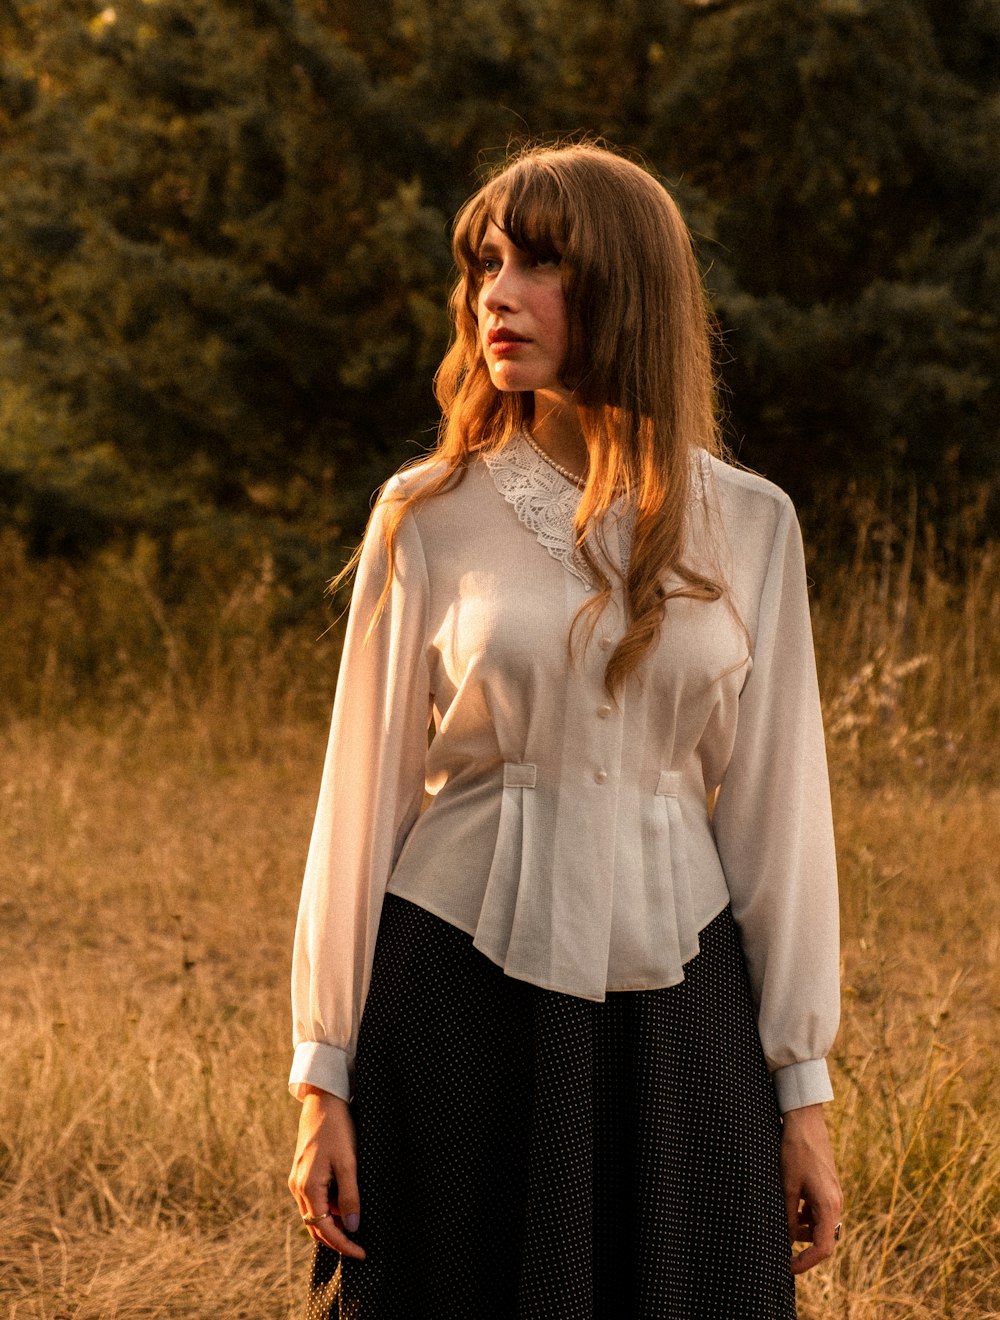 a woman standing in a field wearing a white blouse